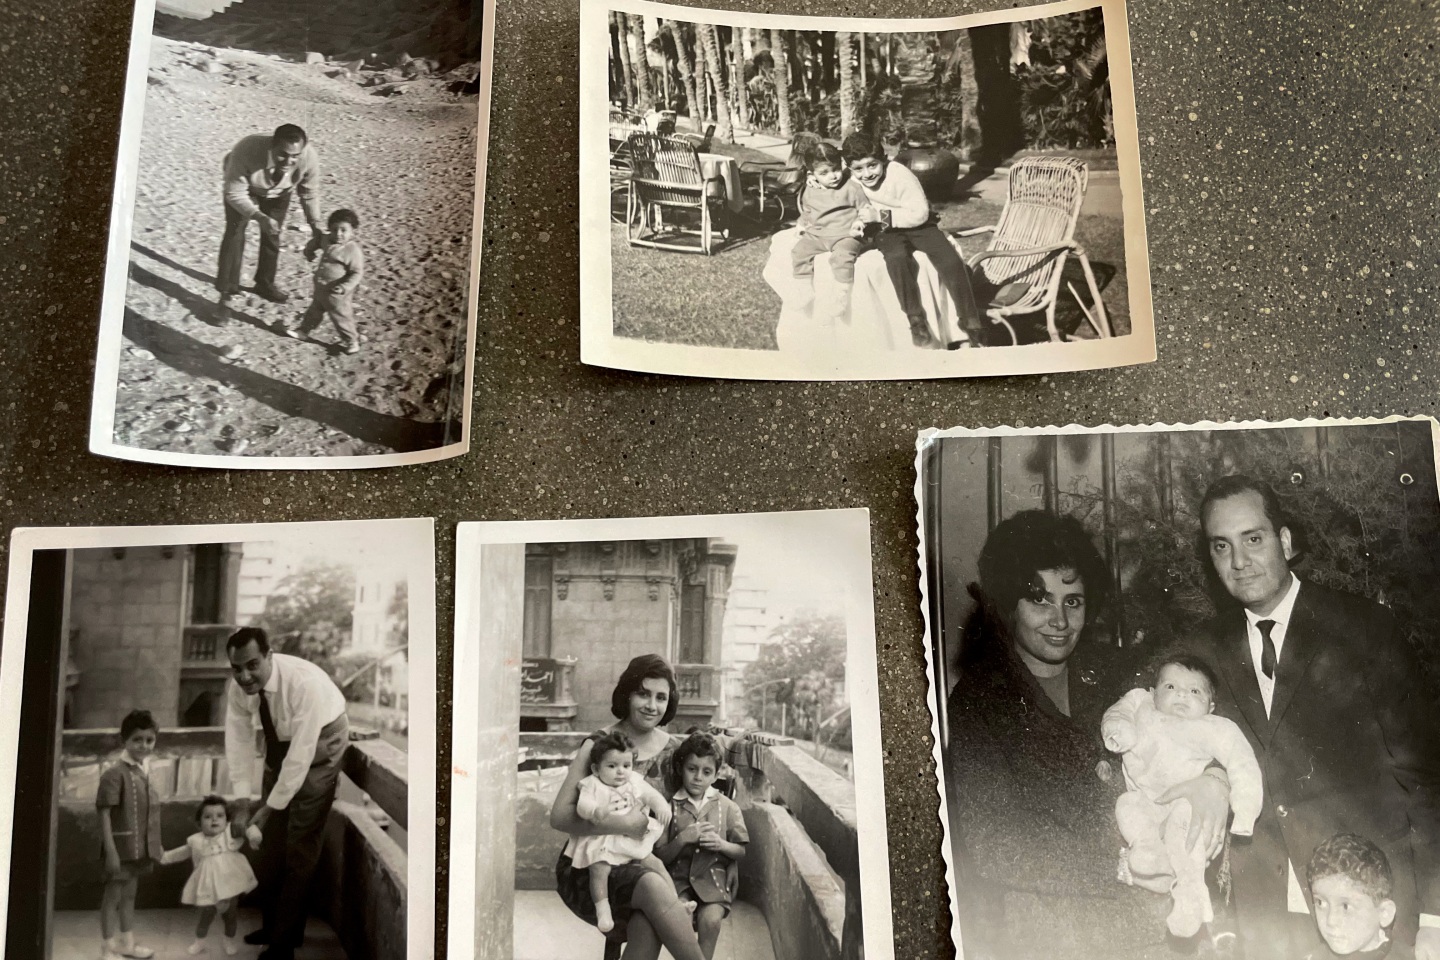 Several black and white photos spread out on a table